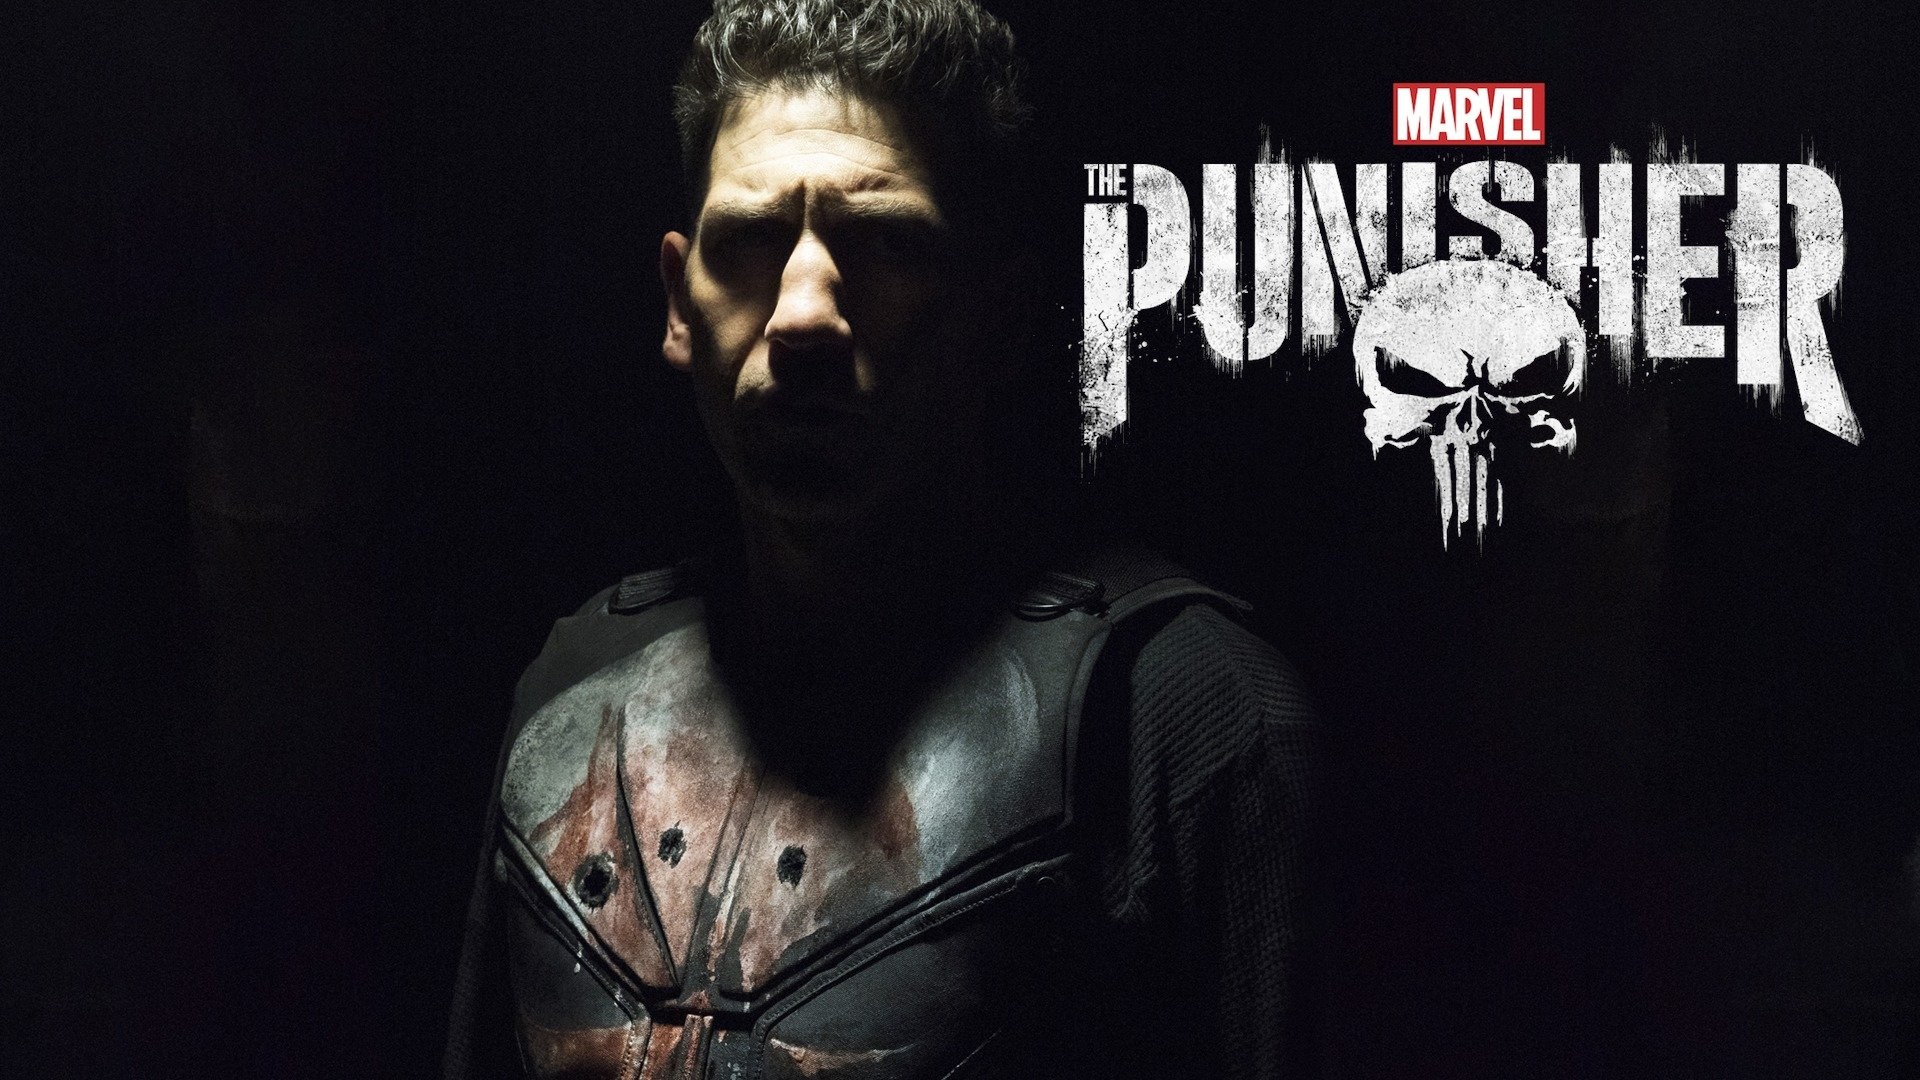 Thoughts on Punisher movies? How would you rank them? Which on eis worth  watching? : r/comicbookmovies